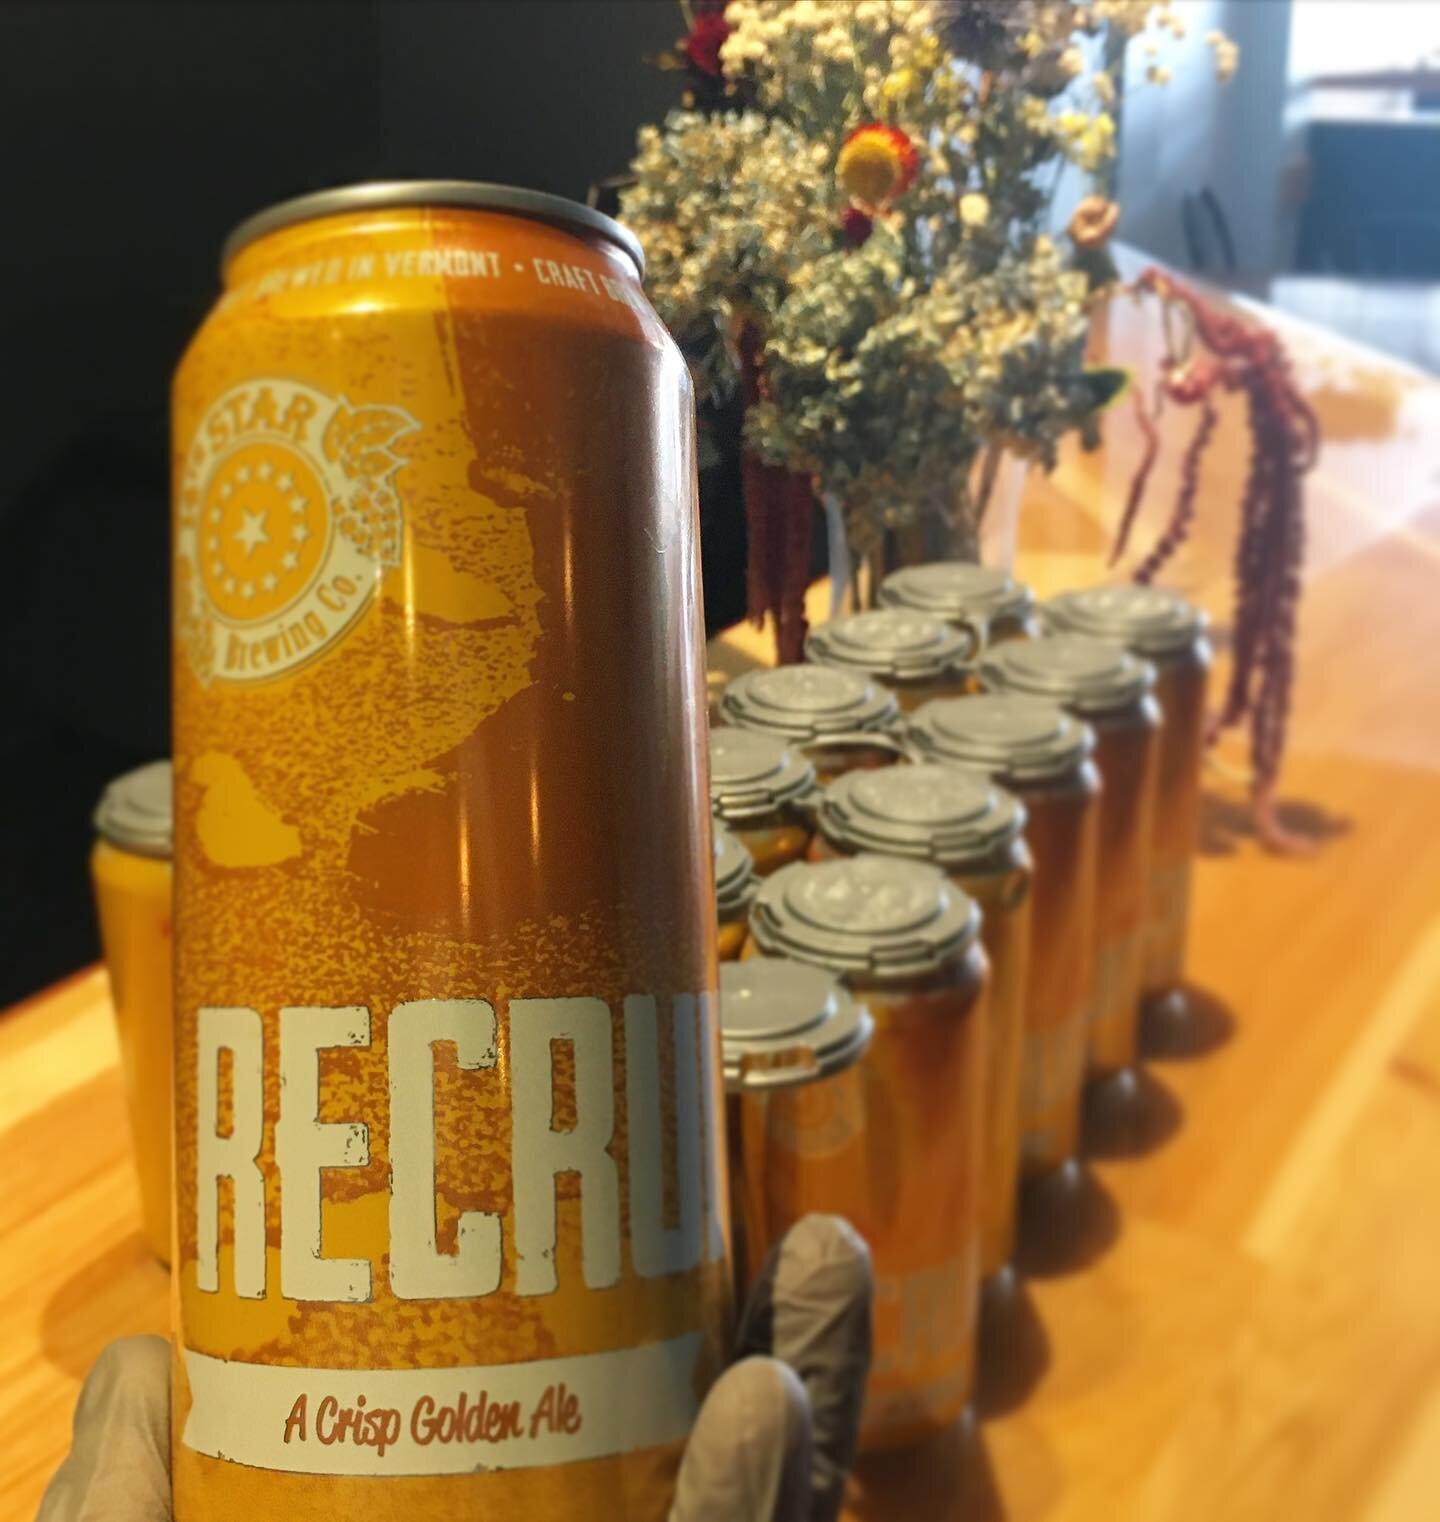 We got our order of the delicious seasonal brew &lsquo;Recruit&rsquo; from 14th Star just in time for Thirsty Thursday! $2 off all Vermont beers for the whole day- including online orders! Let&rsquo;s make the most of these last summer days together 